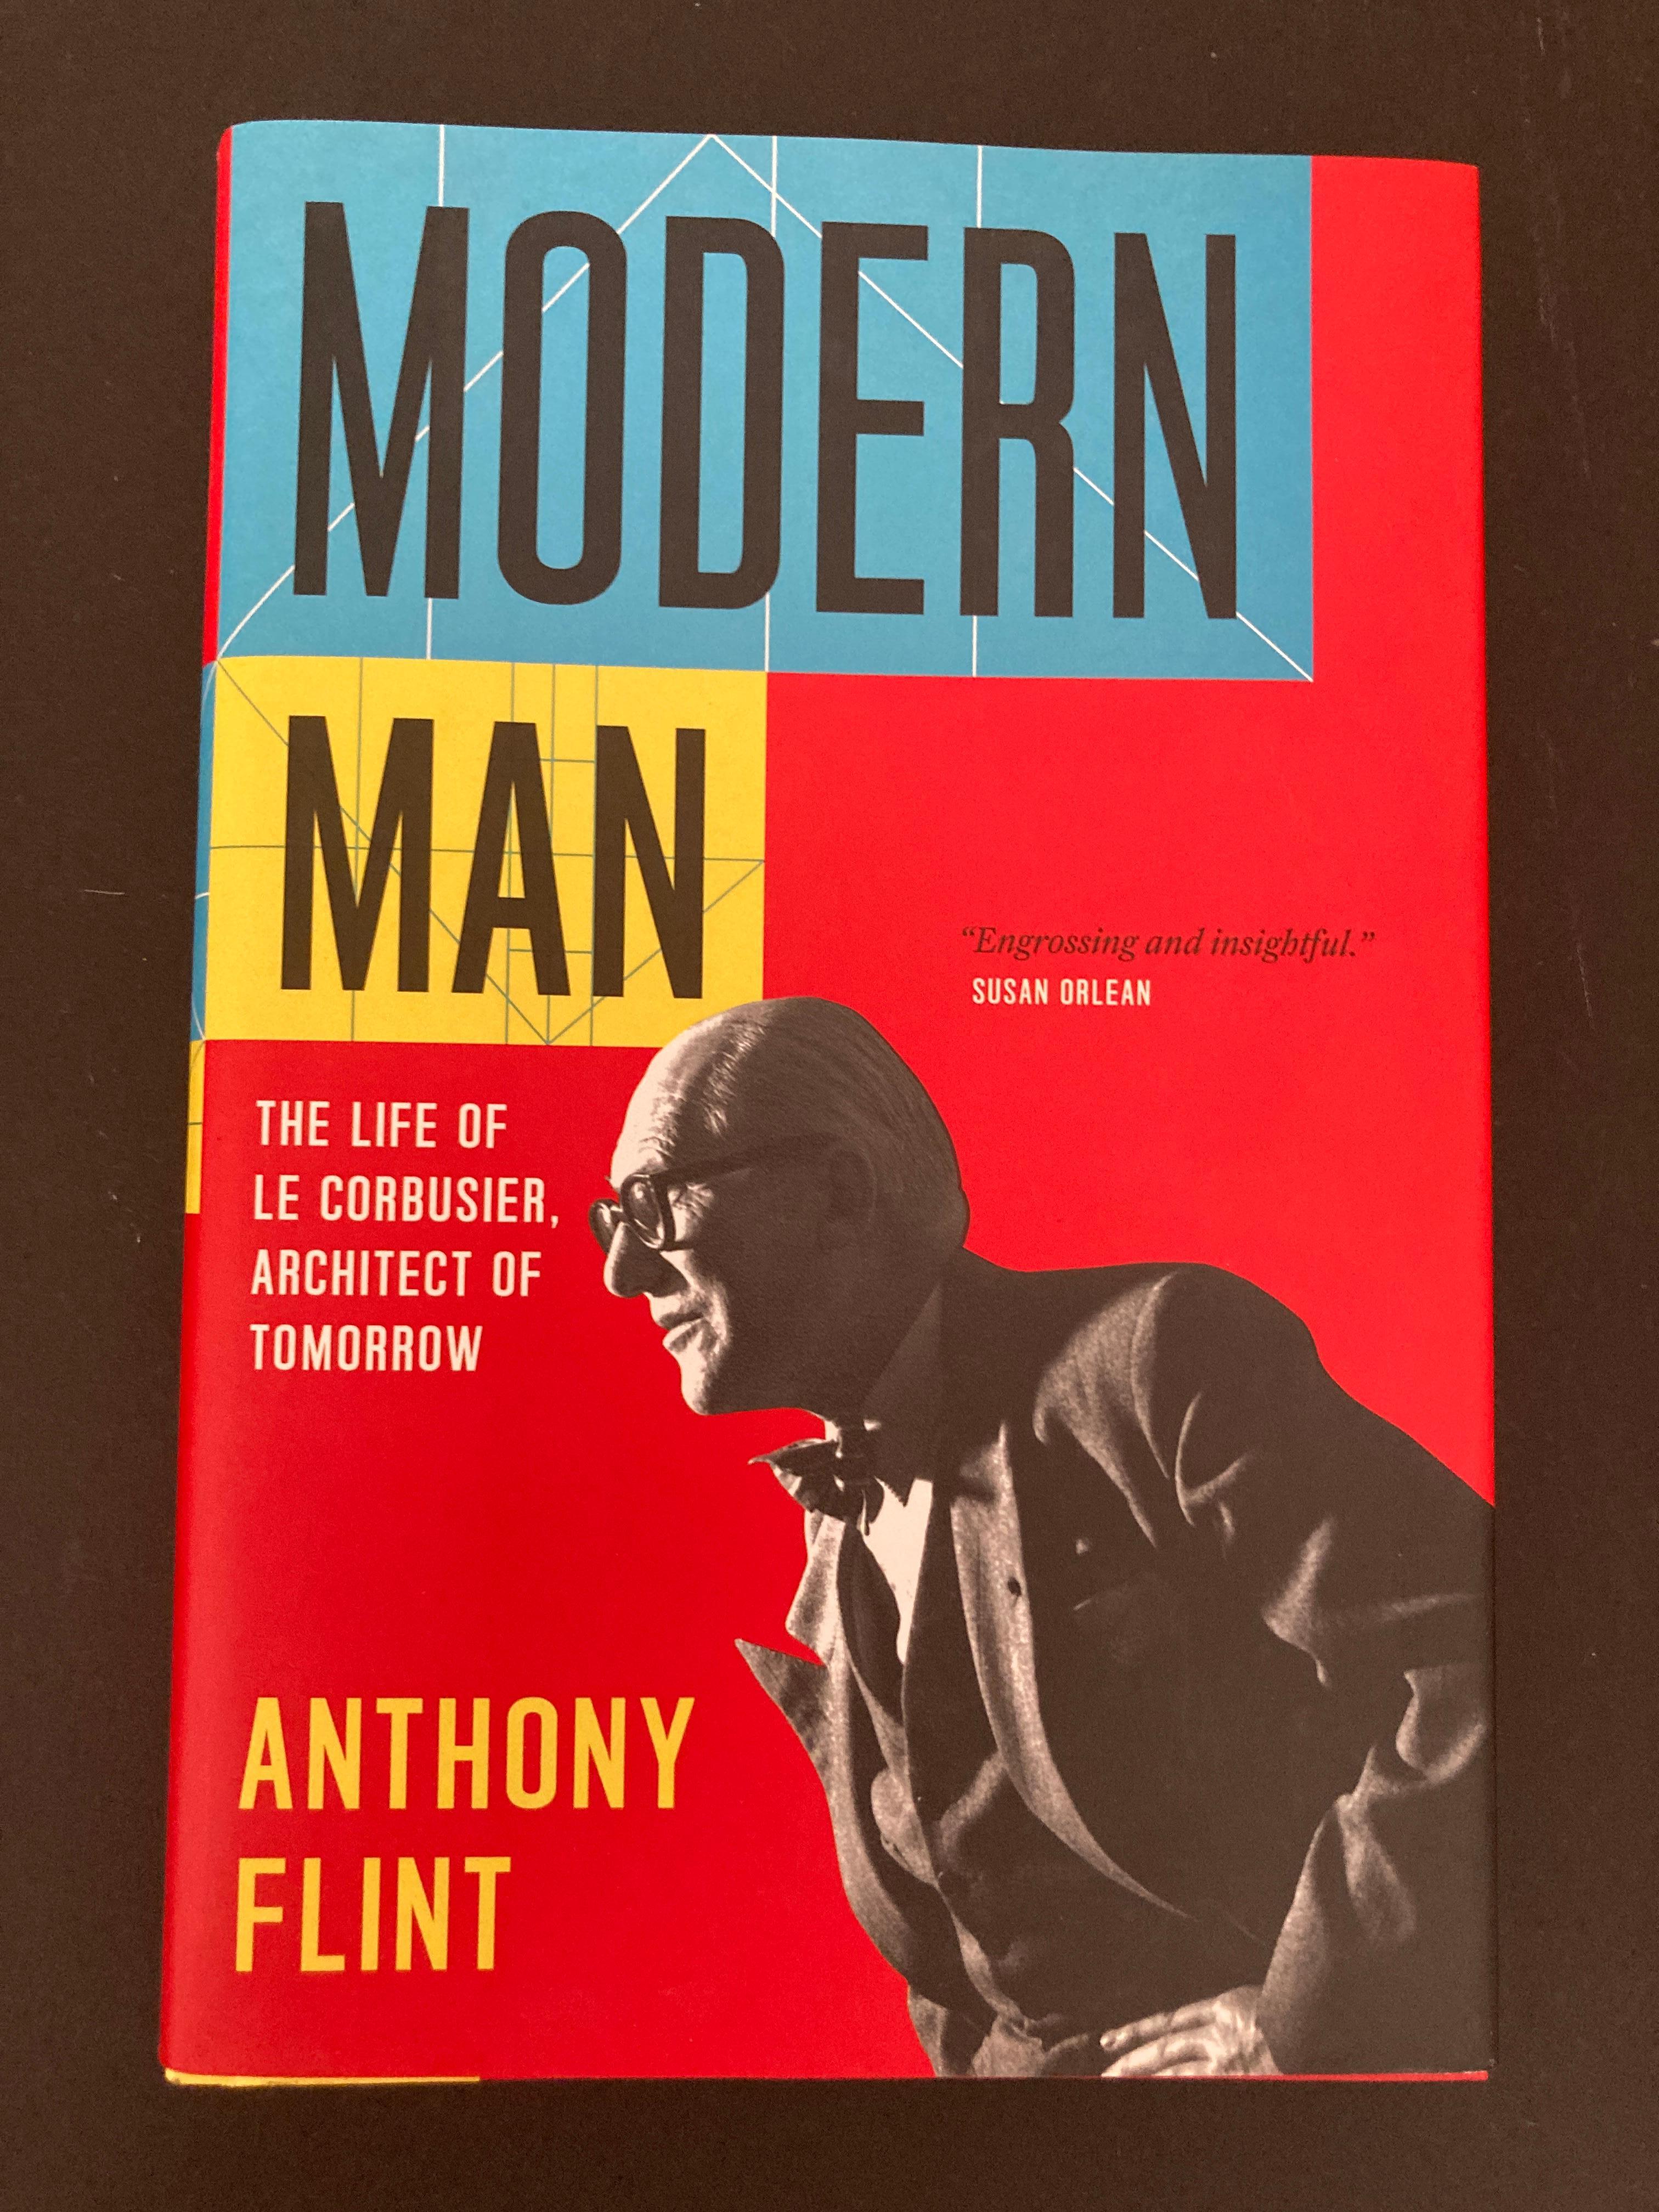 From the award-winning author of Wrestling with Moses comes a fascinating, accessible biography of the most important architect of the twentieth century. 
Modern Man is a riveting biography of Le Corbusier—a man who invented new ways of building